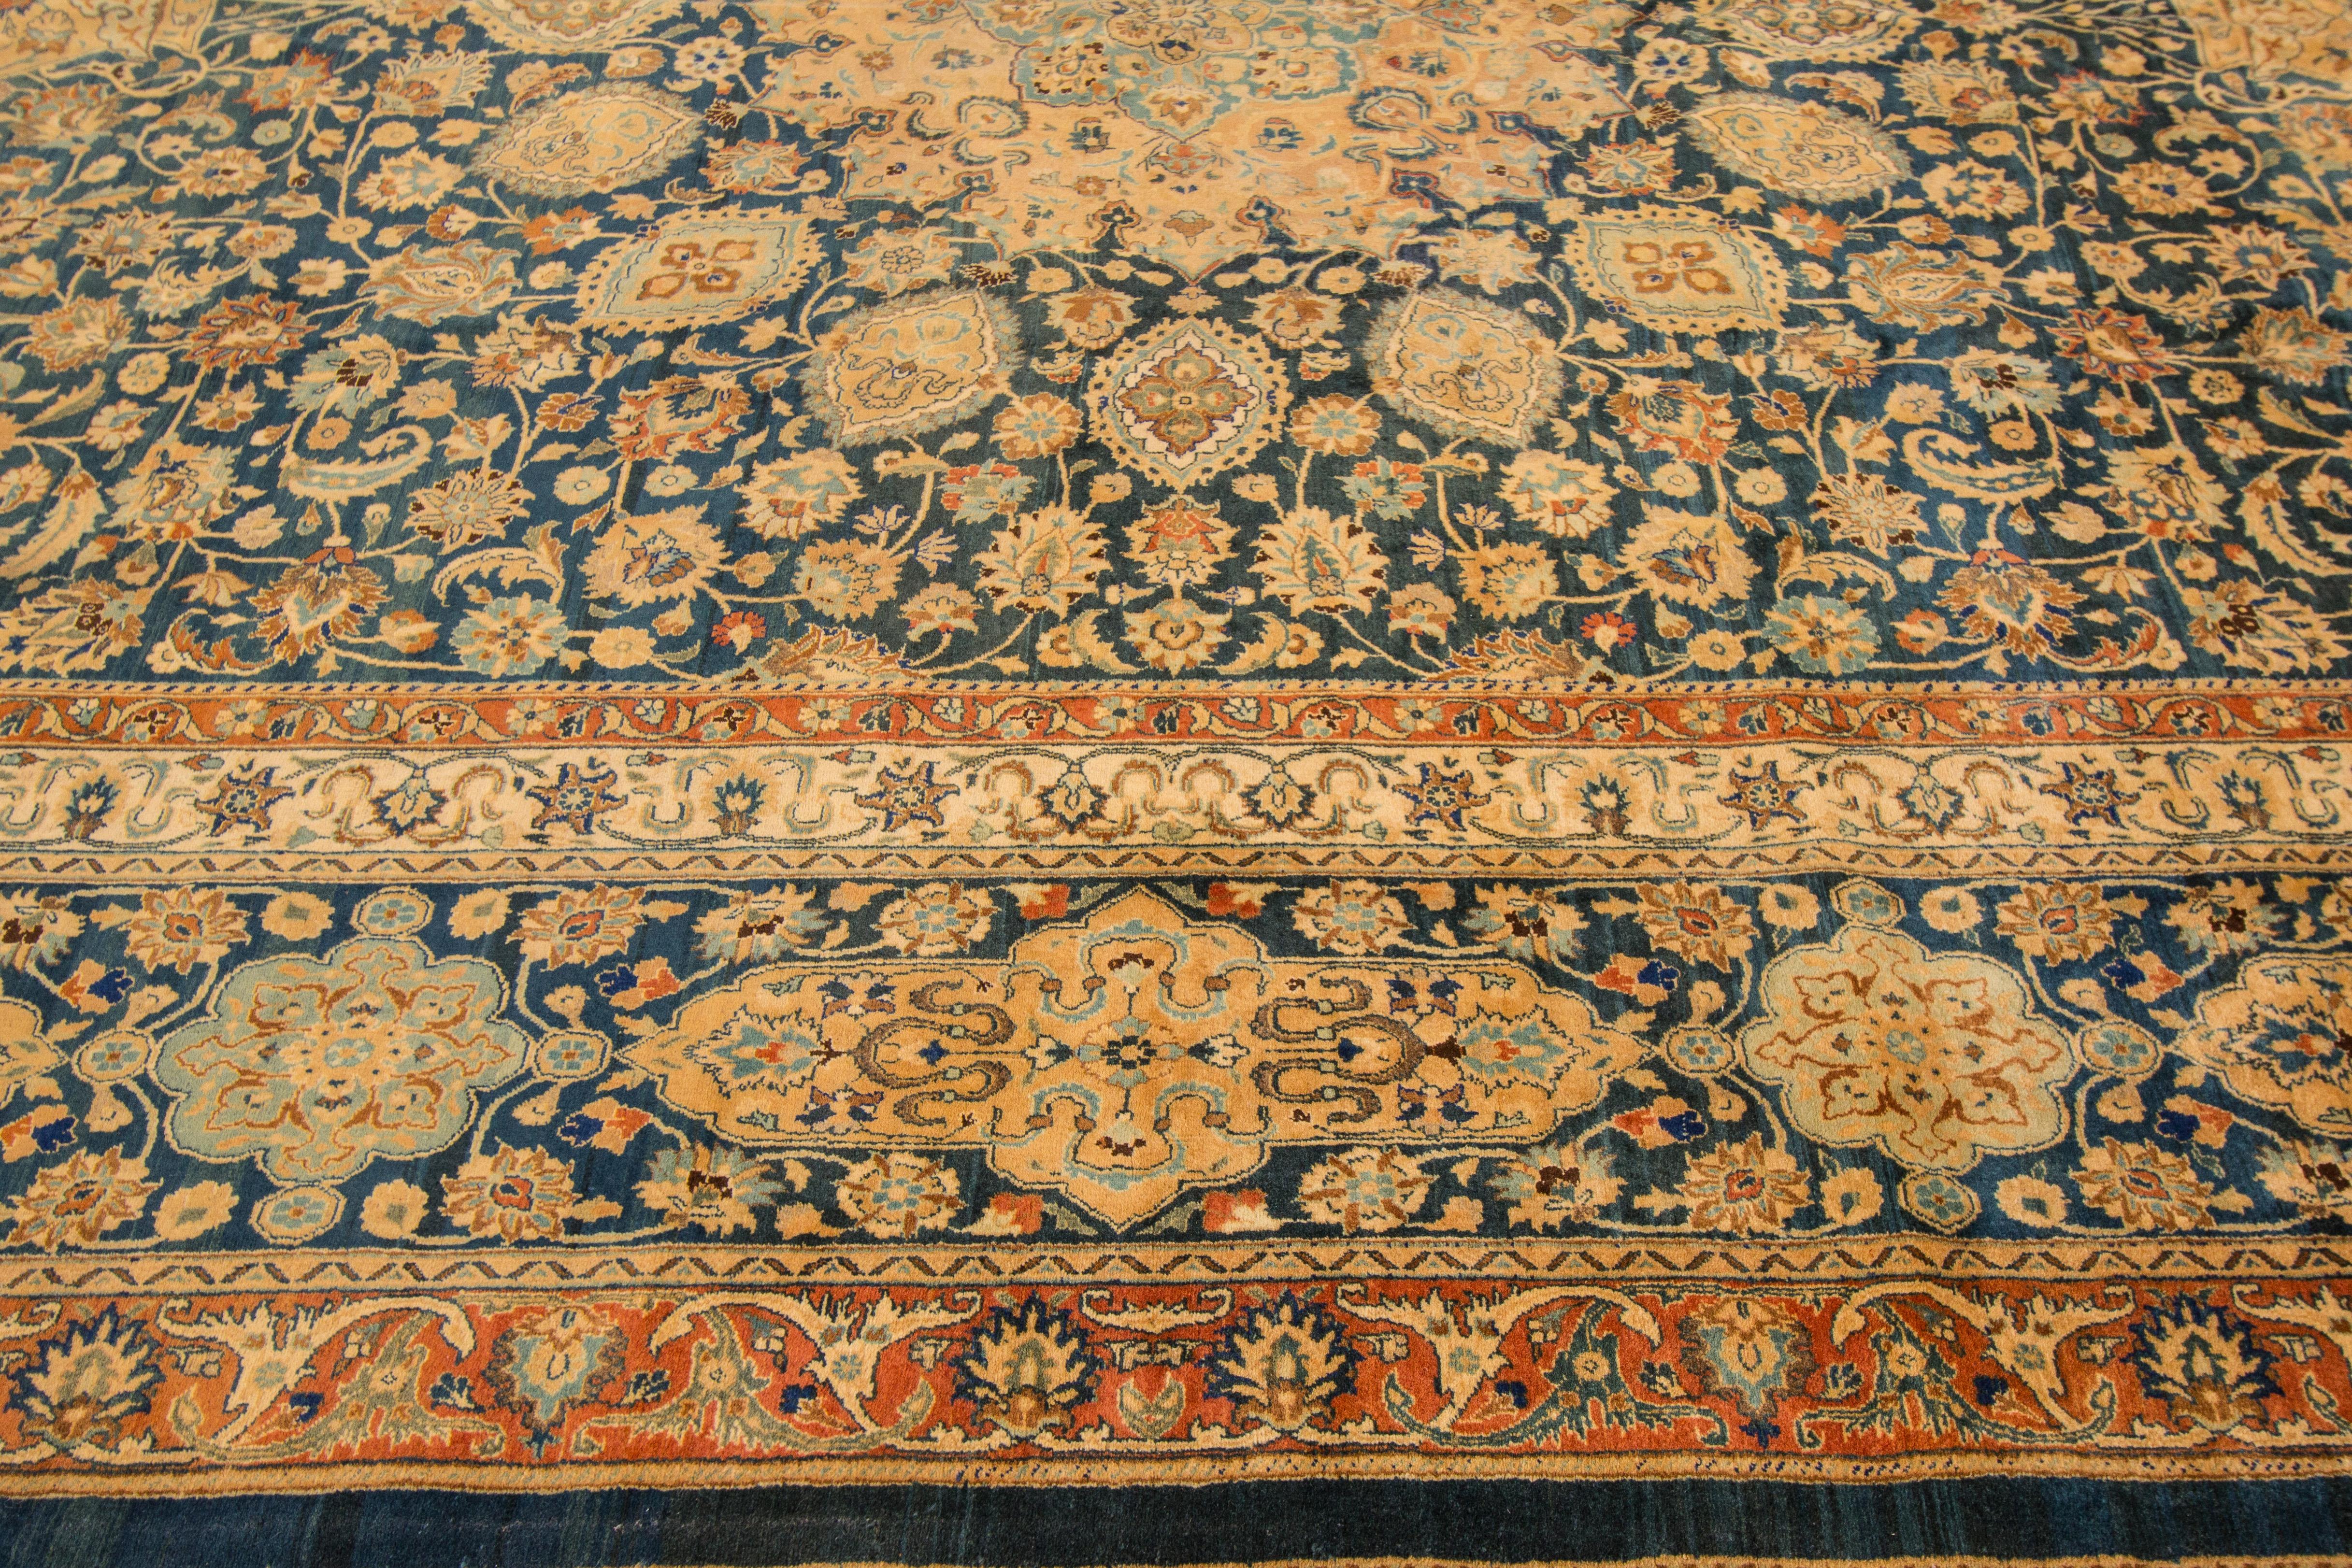 A hand-knotted antique Mashad rug with a medallion floral design. This rug measures: 11'4